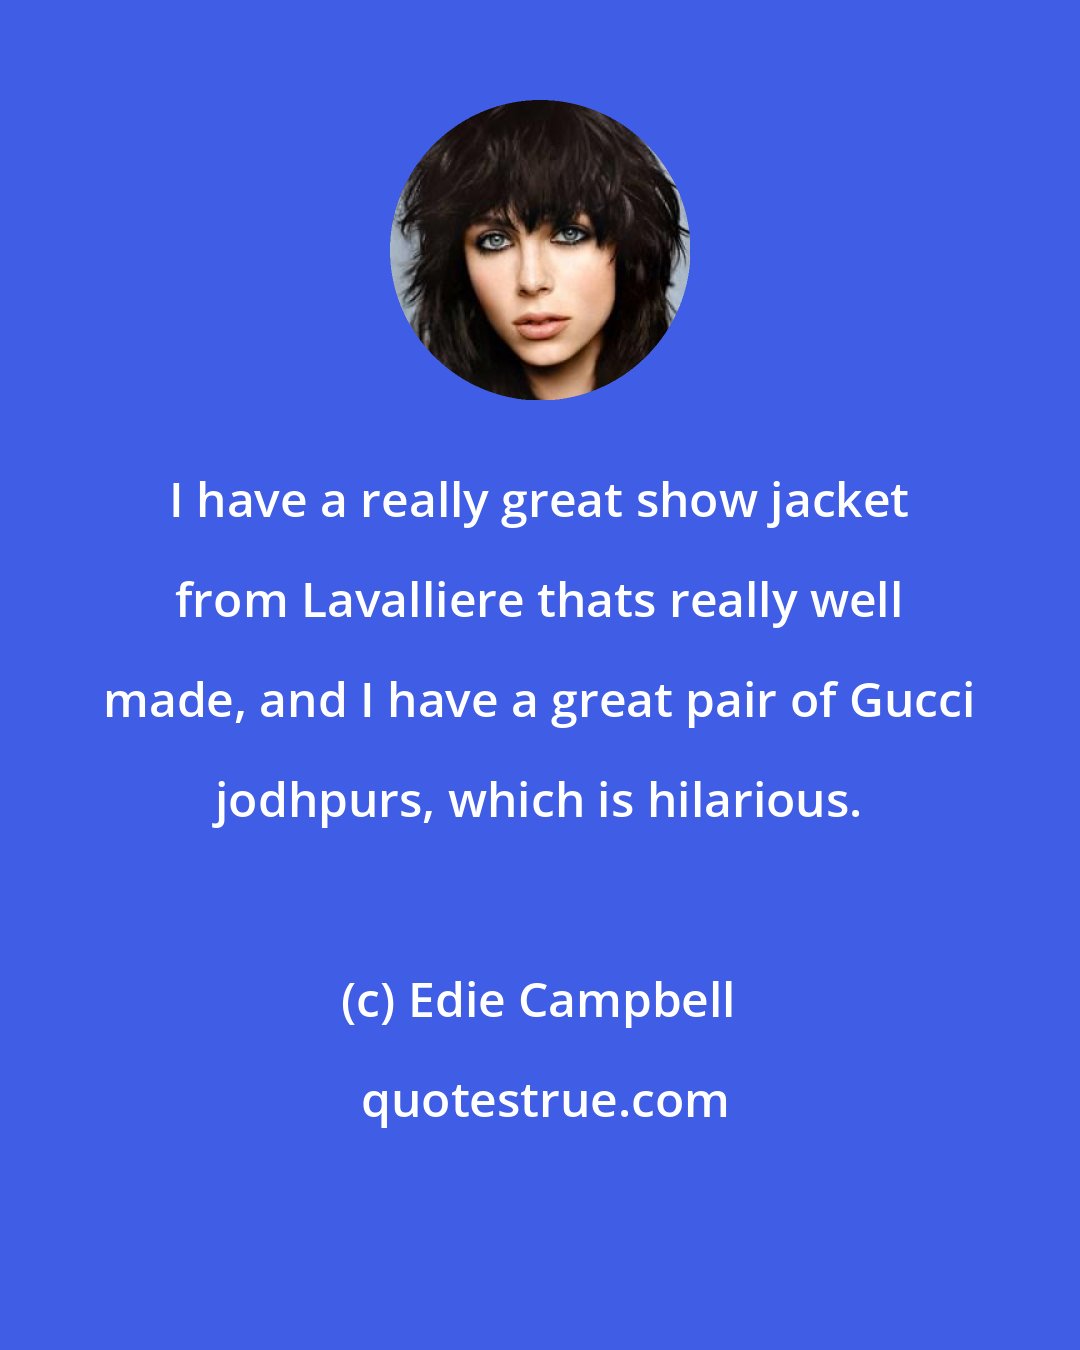 Edie Campbell: I have a really great show jacket from Lavalliere thats really well made, and I have a great pair of Gucci jodhpurs, which is hilarious.